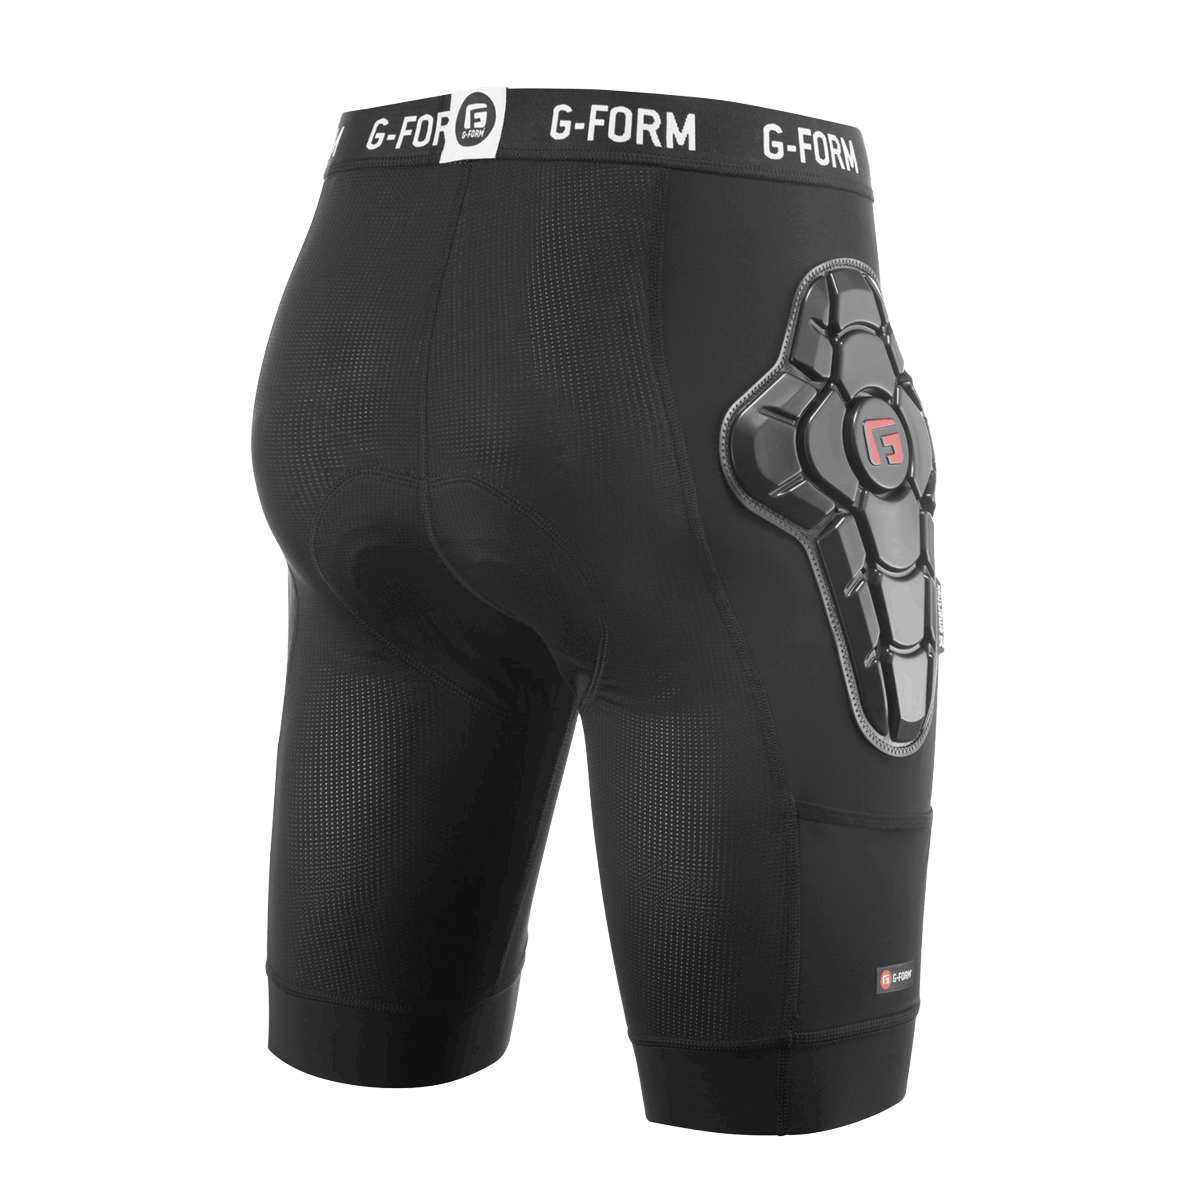 G-Form MX Pants - Padded Compression Pants - Bike Accessories for Safety -  Black, Adult X-Large